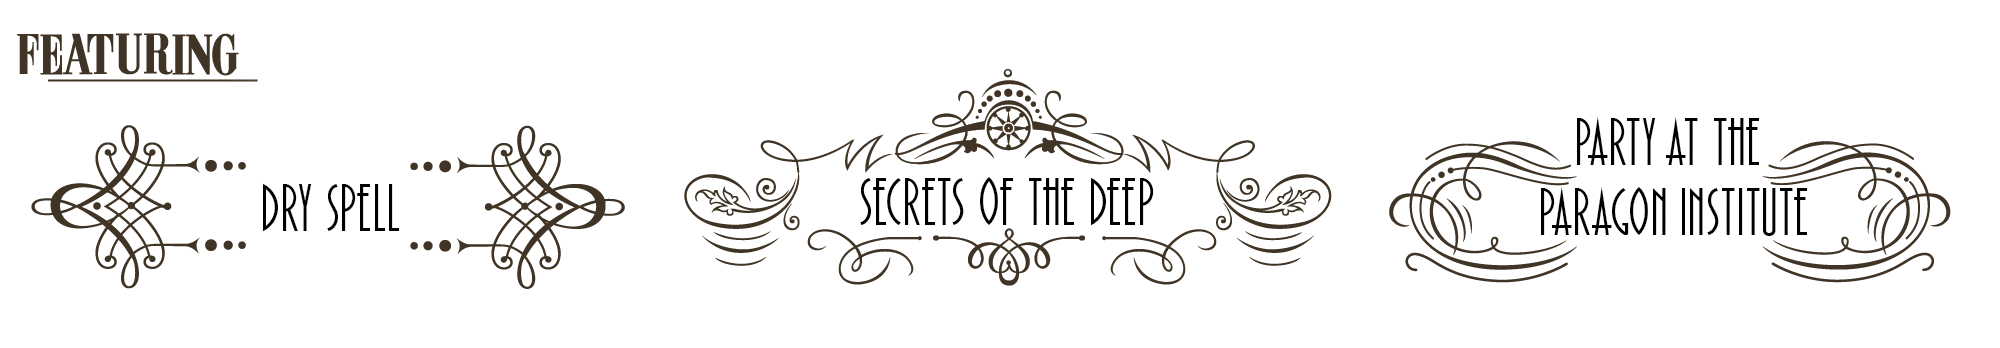 Featuring Three Flagship Games: Dry Spell, Secrets of the Deep and Party at the Paragon Institute!